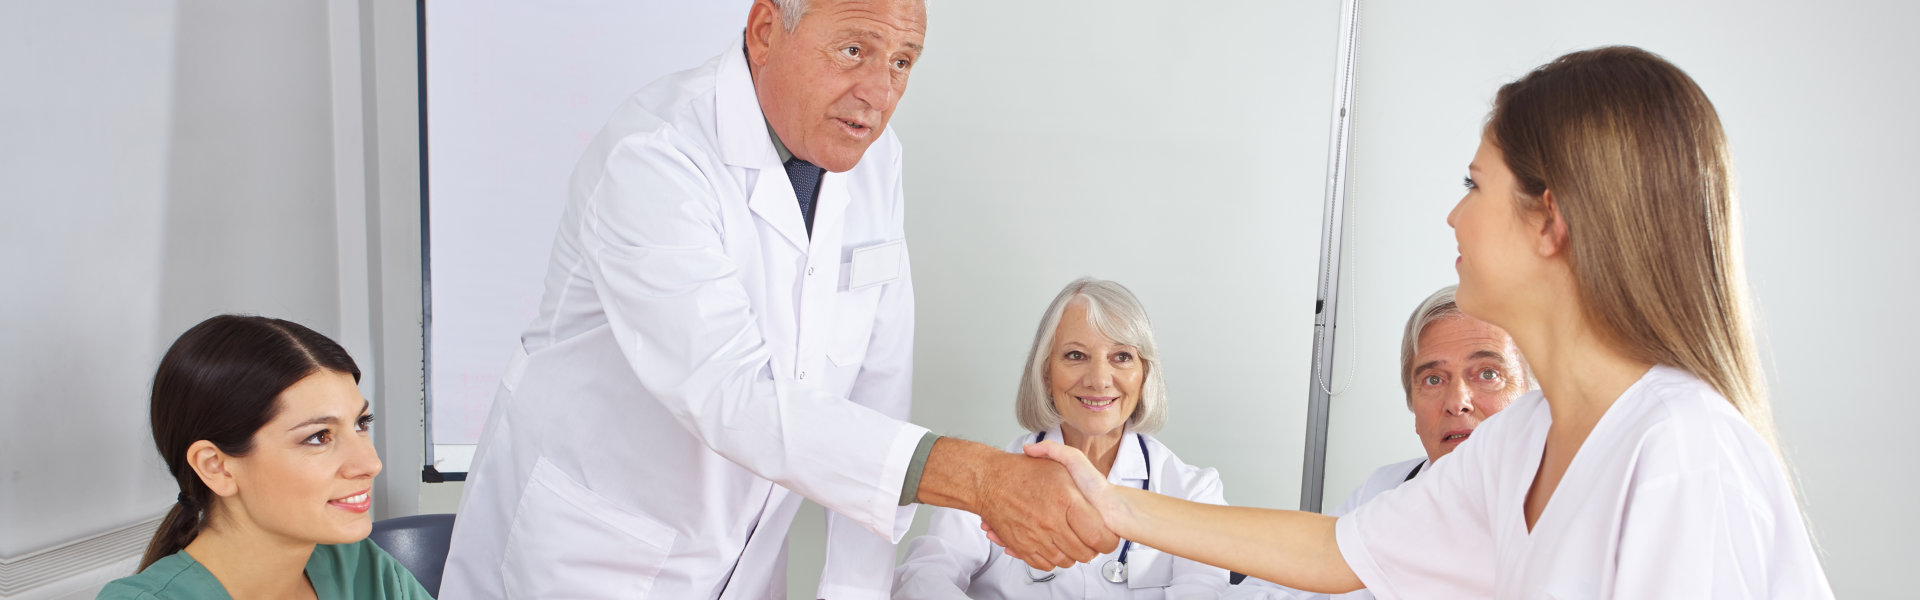 doctor and a lady doing a handshake